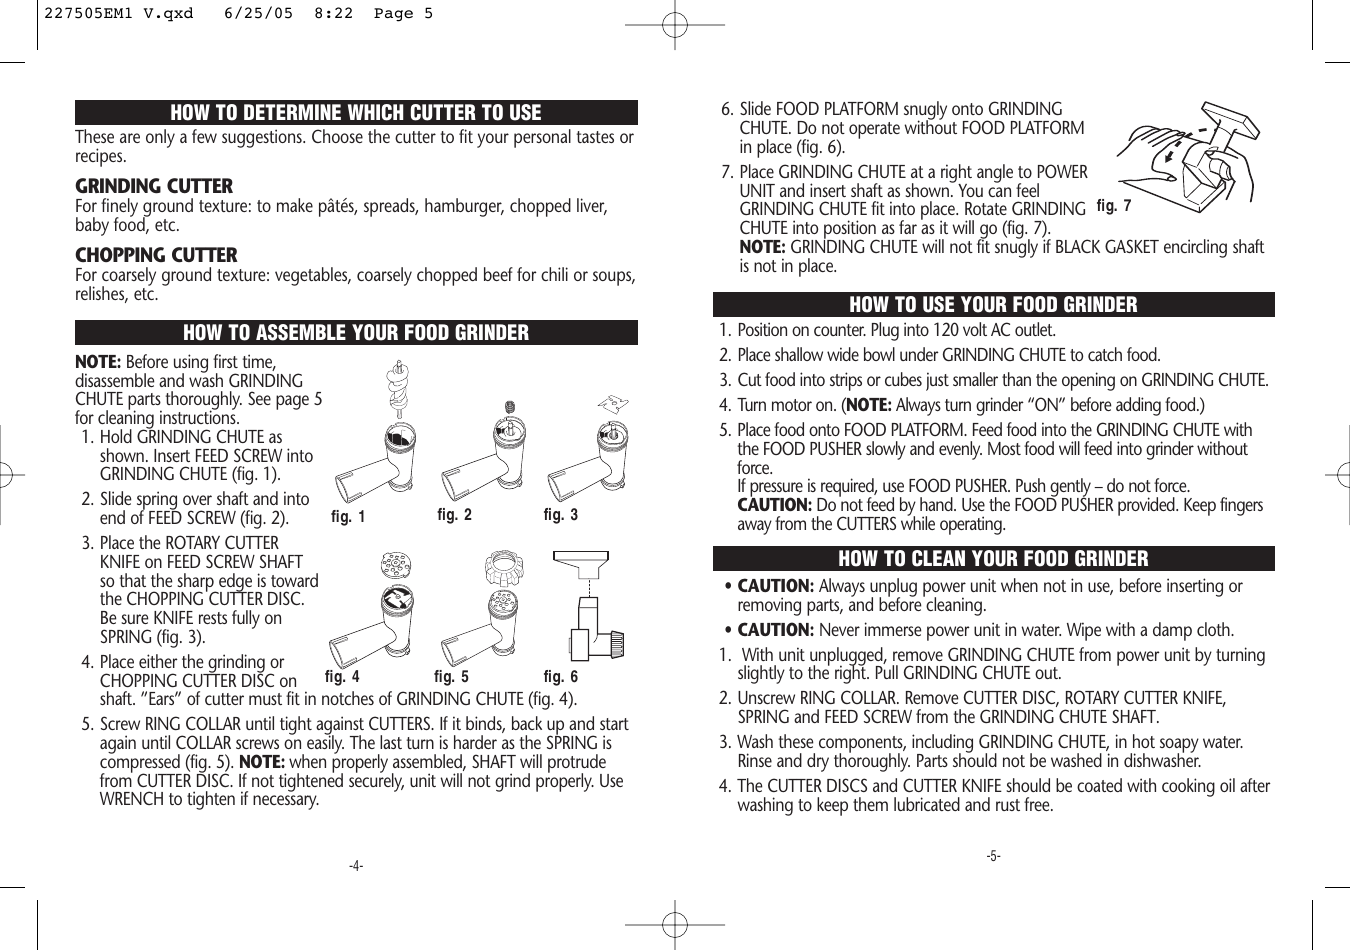 Page 3 of 6 - Rival Rival-Food-Grinder-Users-Manual- 227505EM1 V  Rival-food-grinder-users-manual